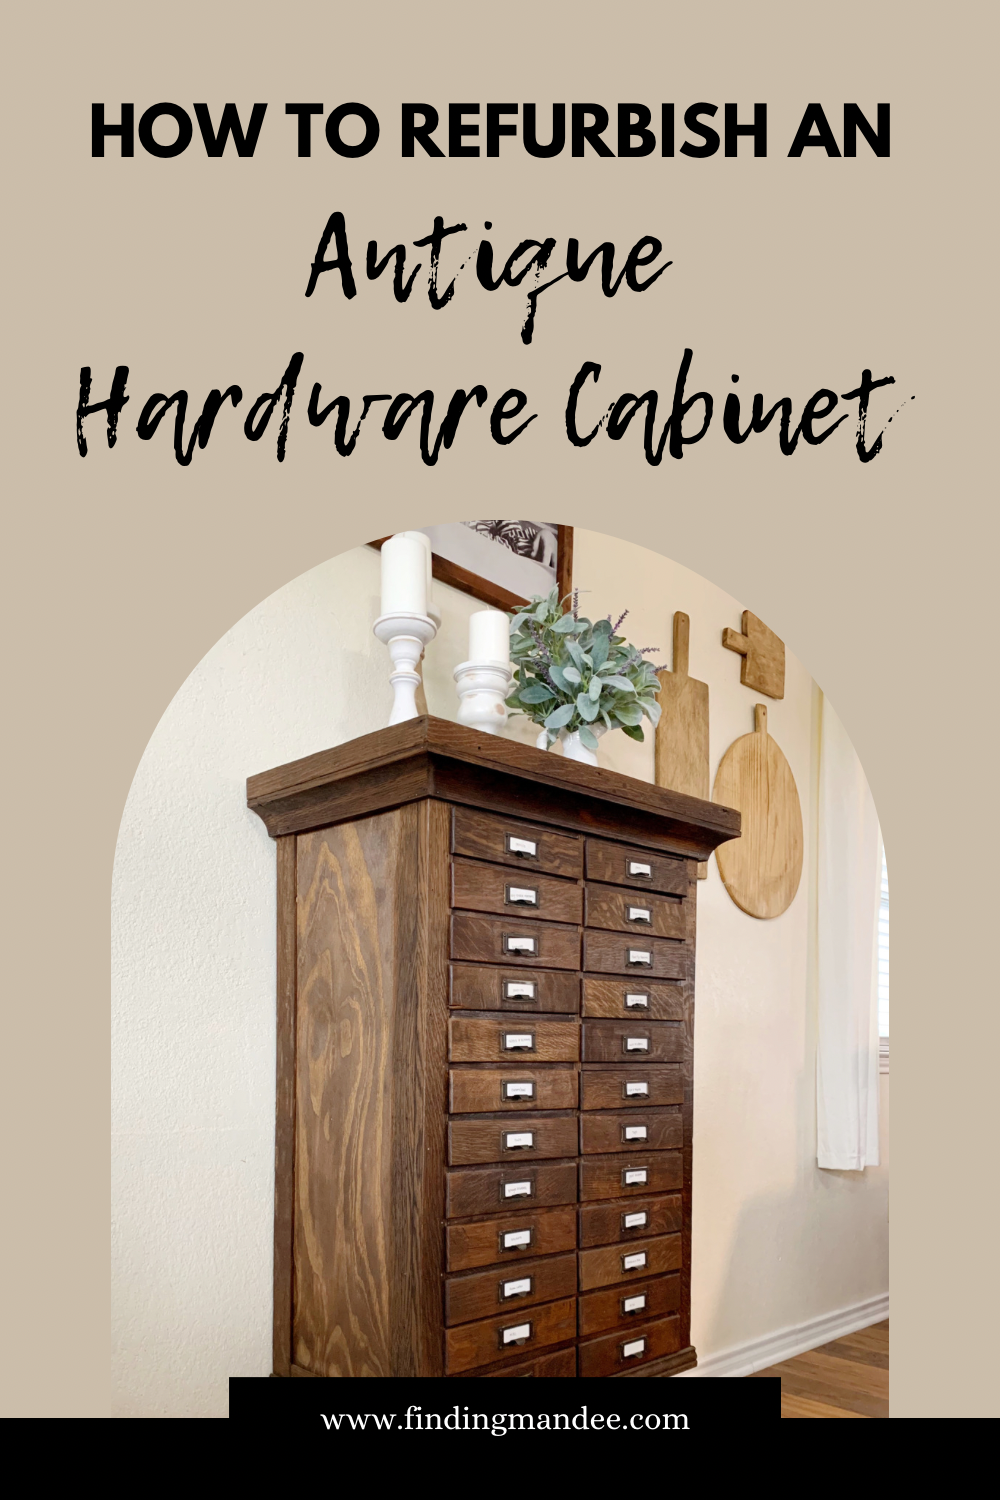 How to Refurbish an Antique Hardware Cabinet | Finding Mandee